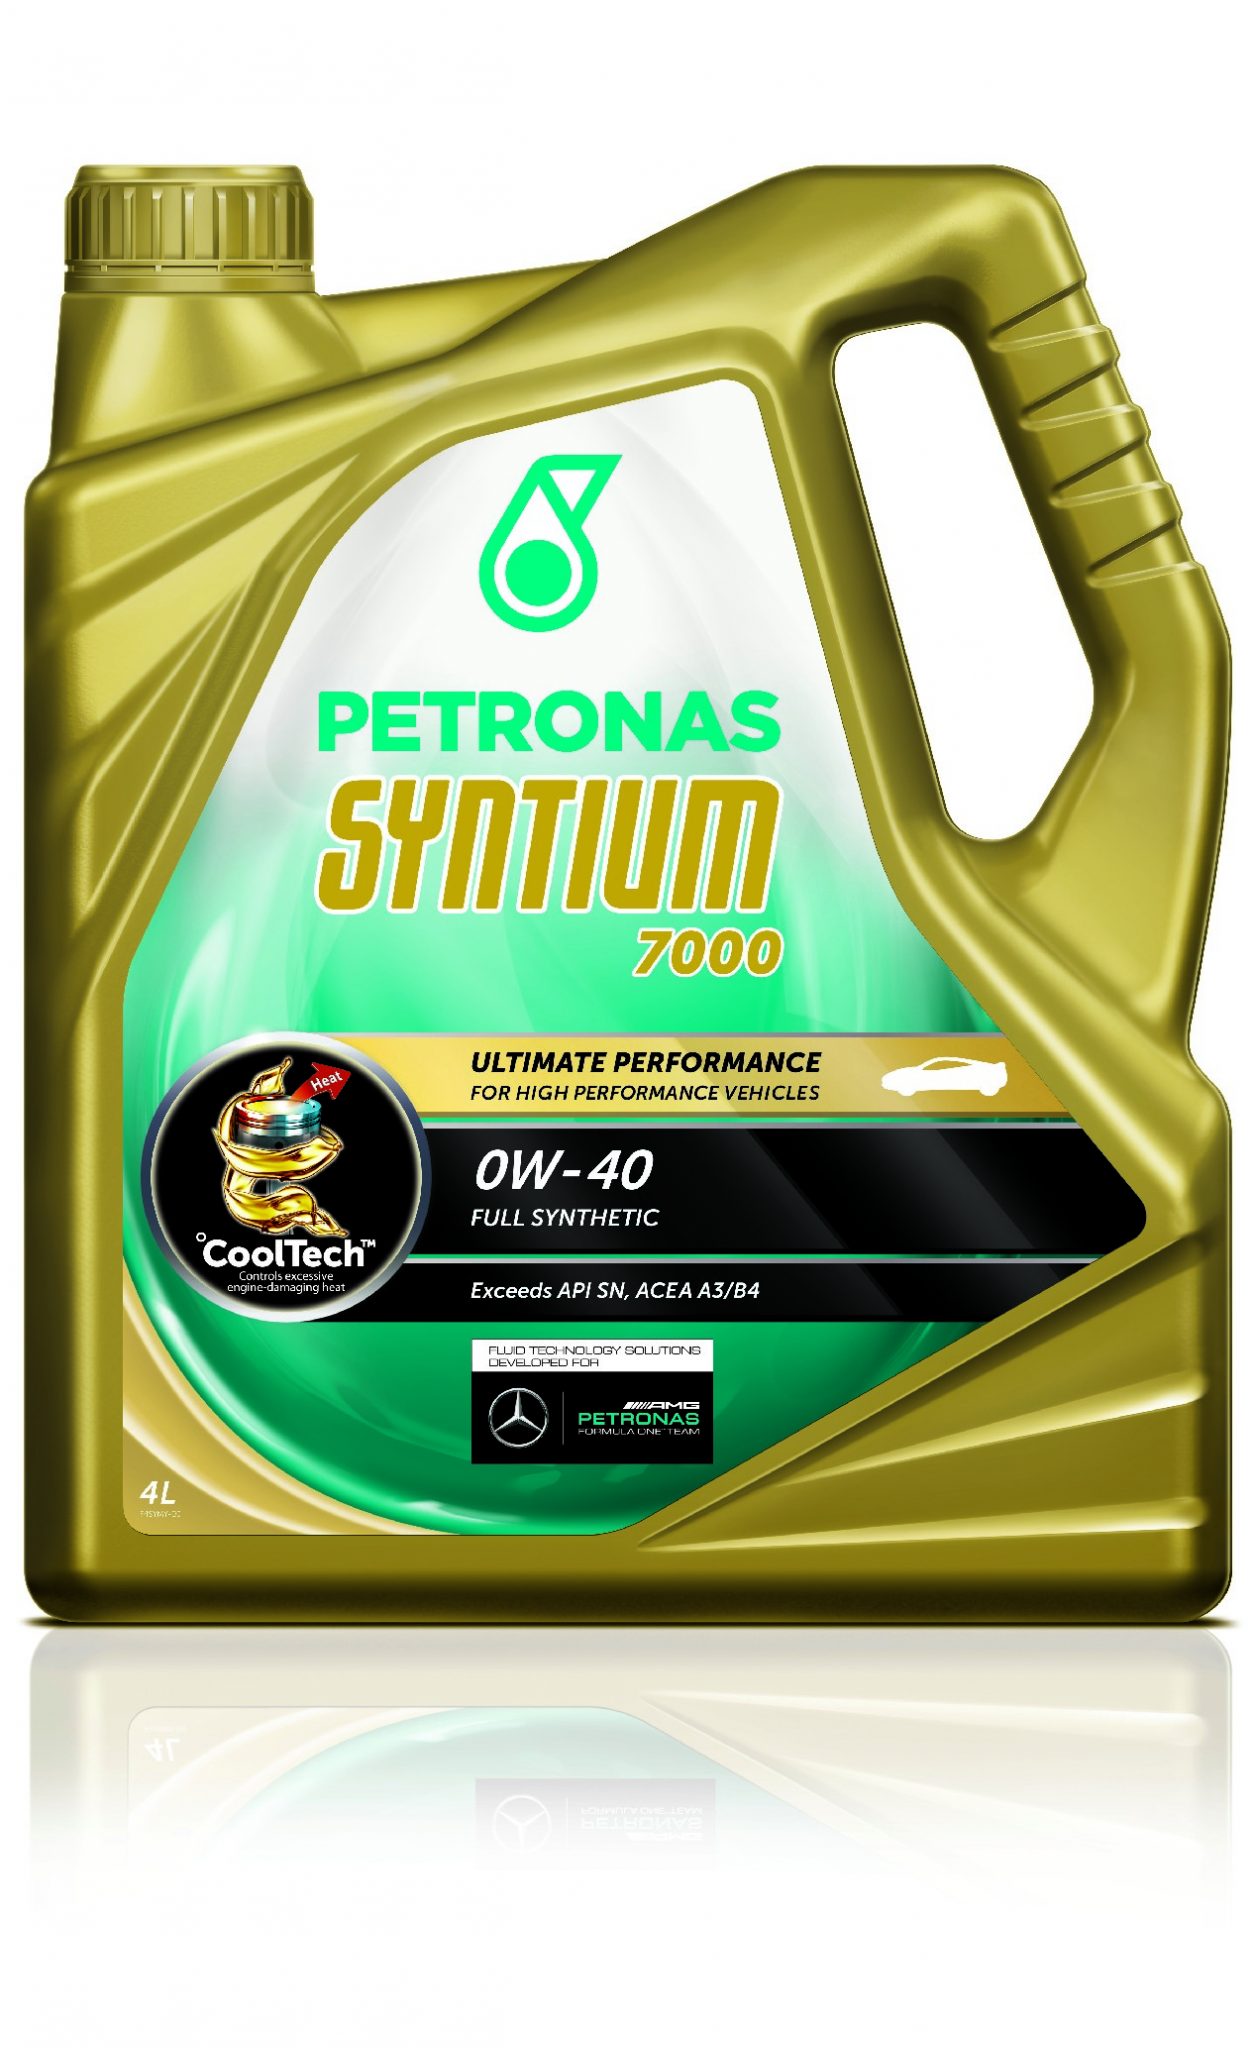 02 PETRONAS Syntium with CoolTech 7000 0W-40